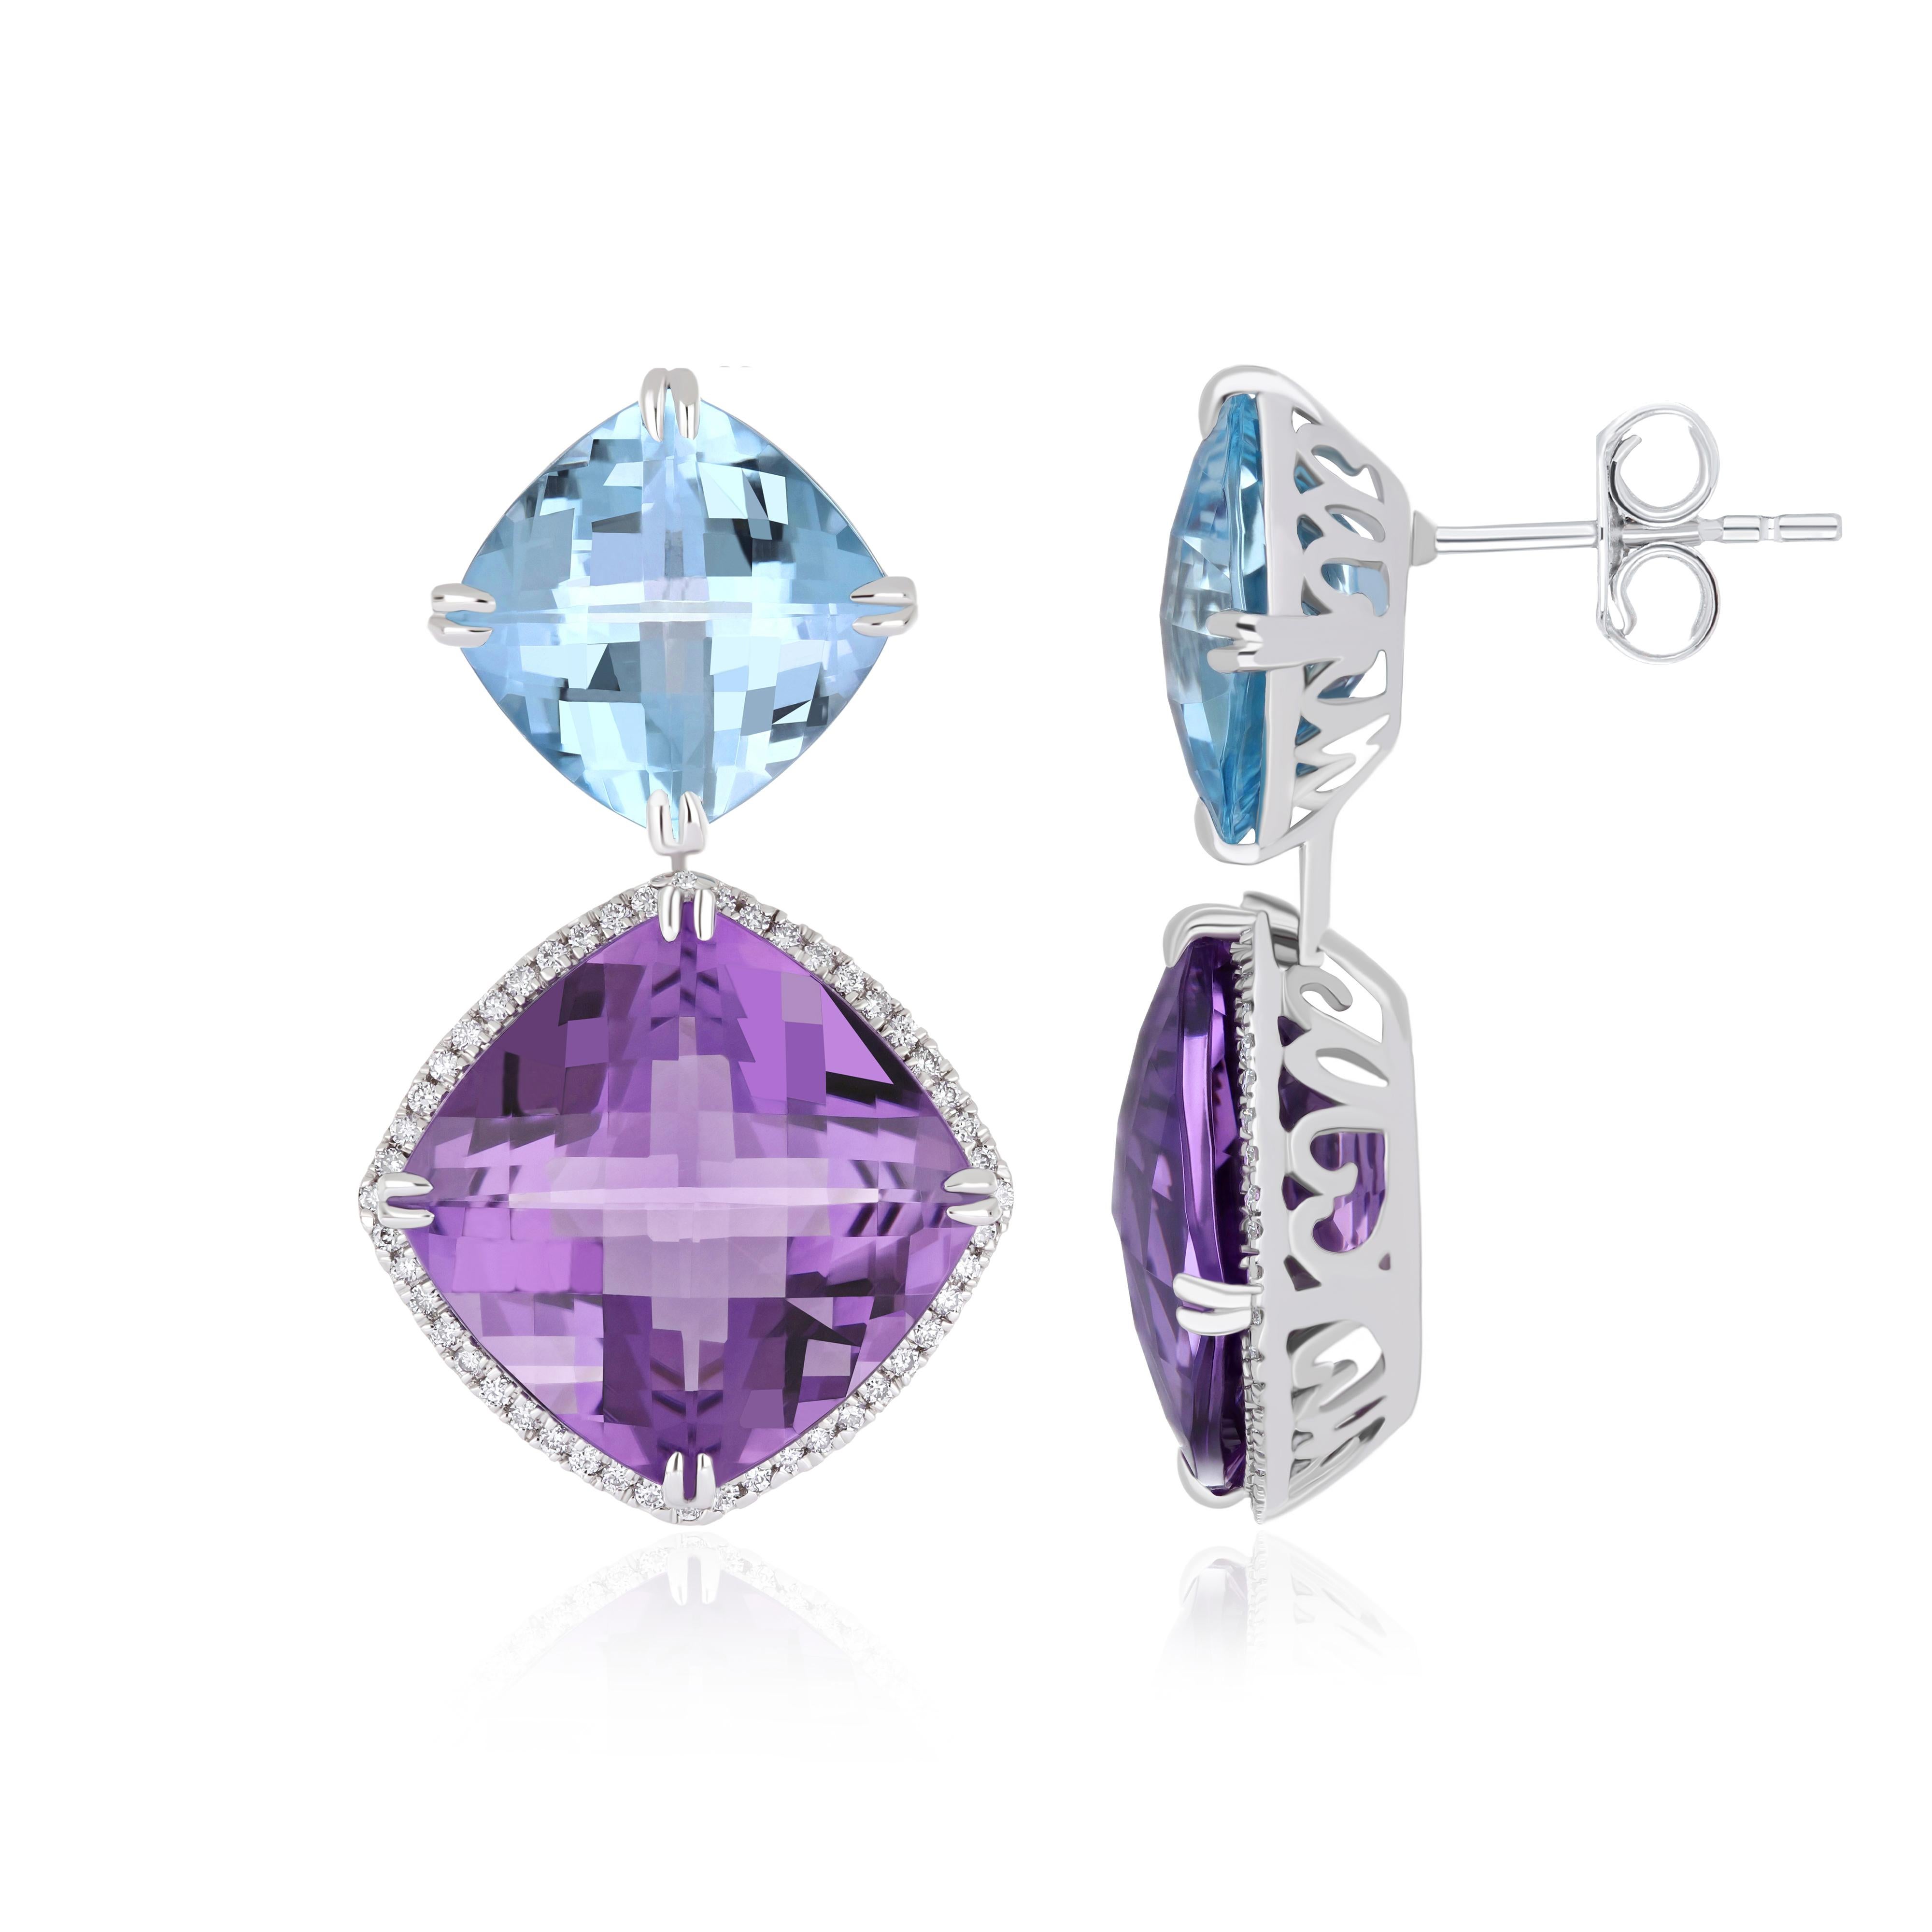 Elegant and Exquisitely Detailed White Gold Earring set with Cushion Shape Sky Blue Topaz weighing approx. 11.80Cts, and Amethyst in Cushion Shape weighing approx. 18.20Cts and Surrounded micro prove set Diamond weighing approx. 0.36Cts Beautifully